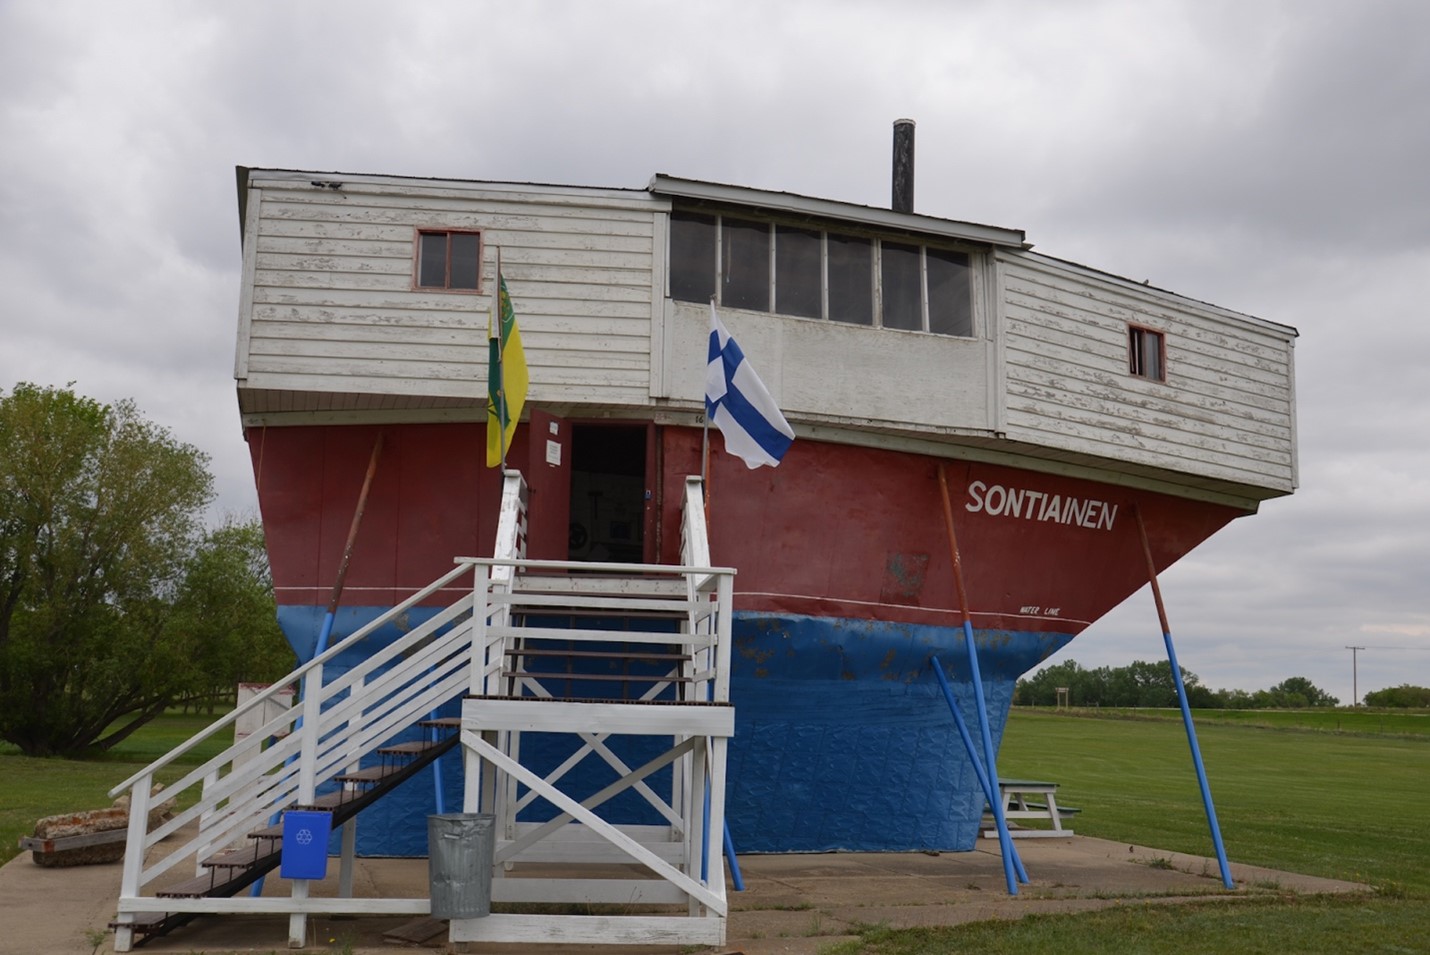 Pictured is a photo of the Sukanen Ship Pioneer Museum. The building is actually a ship on a concrete base supported by metal poles, refashioned into a building for the museum. The ship is white, red, and blue in thick stripes going top to bottom, and the entrance is on the second floor; there is a white staircase leading to the door. The front door is flanked by the Saskatchewan flag on the left and the Finnish flag on the right. On the side of the ship is the name 'Sontiainen' in white text. In the background is green grass and a cloudy sky.